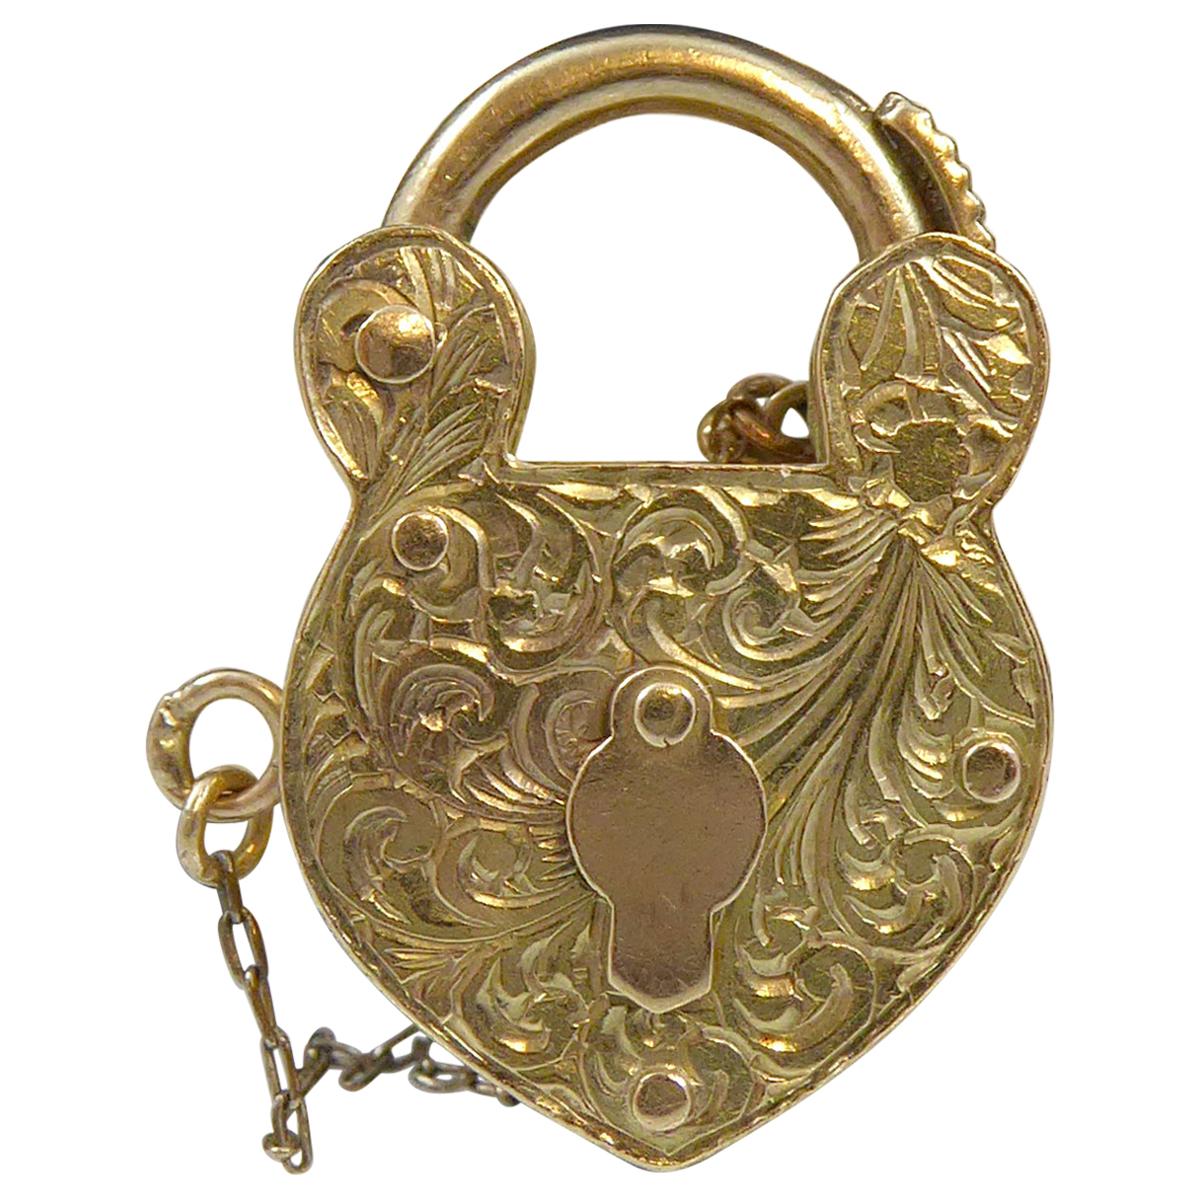 Vintage Gold Padlock Pendant Charm, Fully Lockable Complete with Key 1970s Era